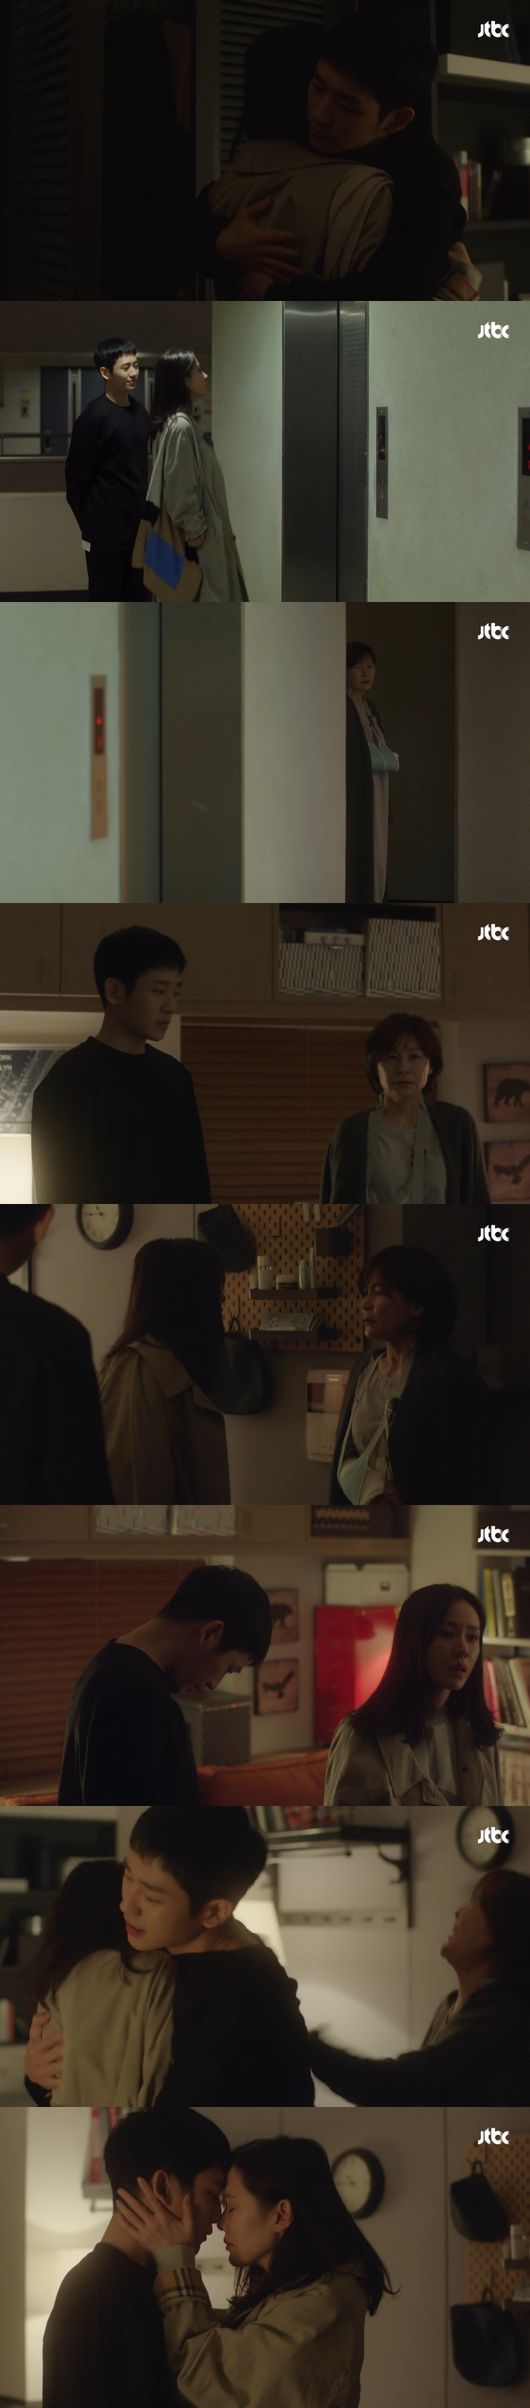 Jung Hae In, a pretty sister who buys rice well, showed a strong love for Son Ye-jin against the opposition of Hae-yoen Gil. JTBCs Golden Earth Drama, which aired on the afternoon of the 4th, is a pretty sister who buys rice well (played by Lee Eun, director Ahn Pan-seok), Kim Mi-yeon (Hae-yoen Gil In the opposition of the il, Seo Jun-hee (Jung Hae In), who did not give up his mind toward Yoon Jin-ah (Son Ye-jin), was drawn. Mi-yeon, who felt the whereabouts of Jin-ah with a sense of sixty, raided Jun-hees house.Junhee was surprised to see Mi-yeons face on the monitor, but he tried to calm down in front of Jin-ah and try to solve this situation alone.At the end of Junhees saying that he could not open the door, Mi-yeon seemed to turn his step home without seeing his daughters face.She seemed to have returned, but she was hiding in the elevator, watching Junhee and Jina, and when her daughter left, she met him again and begged him to break up. Mi-yeon said, What did you think of your brother and sister...Jina and you are in a great future. You should not spend precious time. But when she came out strongly, she showed her sincerity. She put a nail on Junhees heart.Youre not a man of my standards. Youre a child, arent you? I dont care. What parents dont want to give you better.Jina, who felt strange when Junhee did not answer the phone, came back and said, Why did you lie? After seeing her mother and boyfriend, she was angry.Jun-hee organized the situation by stopping the mother-daughter fight with her whole body. In Mi-yeons words, Jun-hee said, I can not give up my sister.I will never give up. The strong determination of Junhee, who gave everything for a woman who loves her without giving up easily even against her parents objections, rings her heart.Junhees attitude and heart are probably what all women want from their boyfriends.